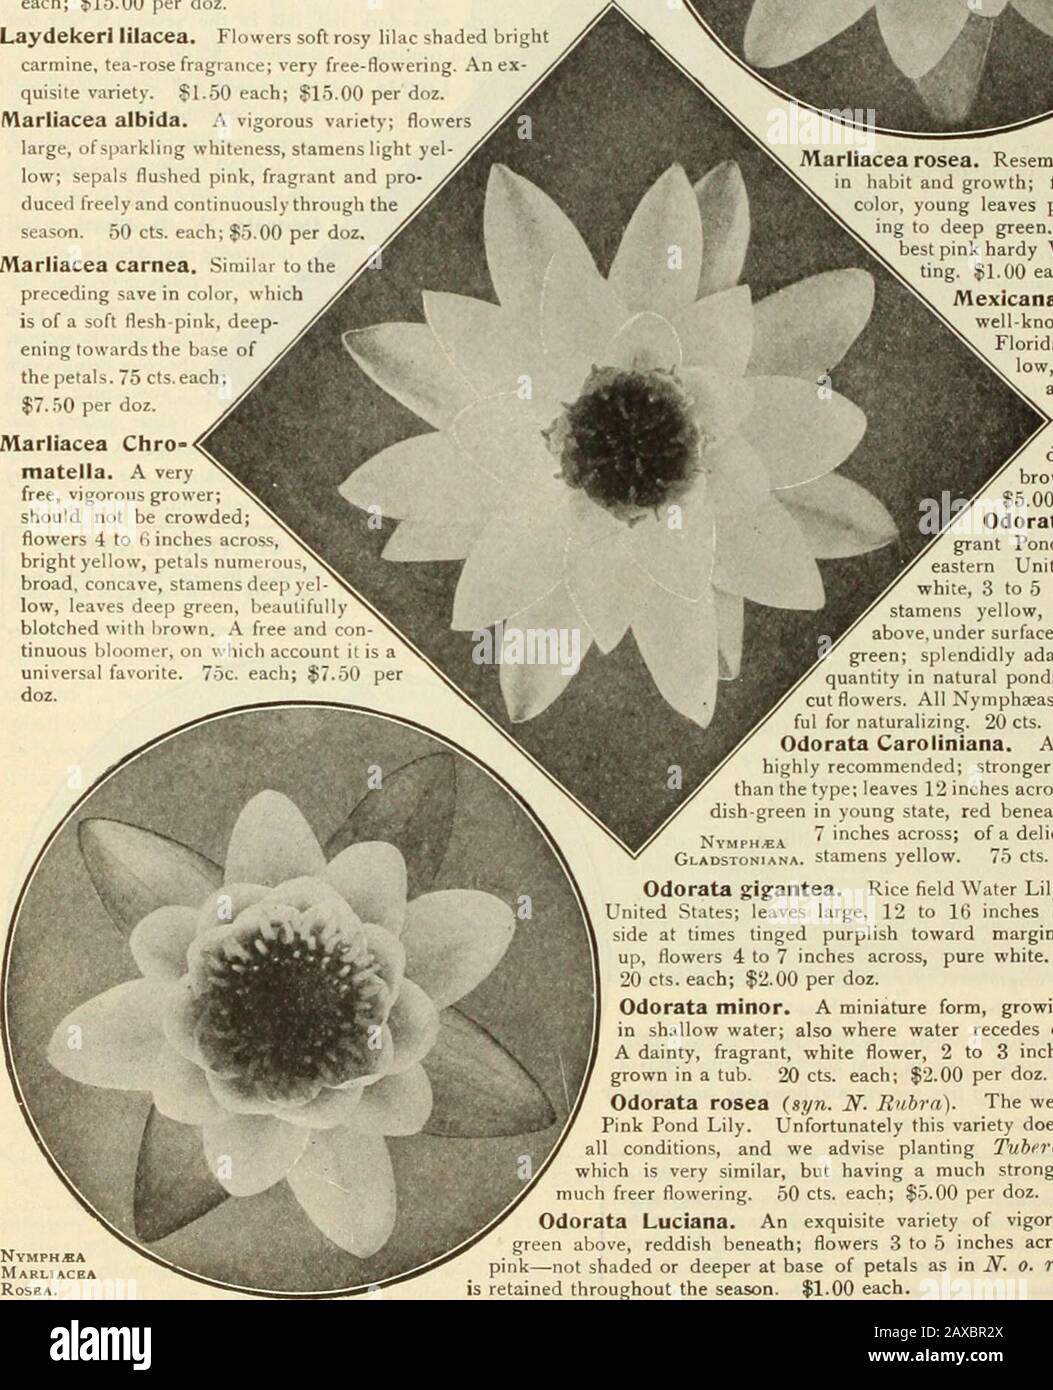 Dreer's garden book : seventy-fourth annual edition 1912 . NVMPH,B MarliacbaChromatilla. Marliacea Chromatelia. A veryfree, vigorous grower;should not be crowdedflowers 4 to (i inches across,bright yellow, petals numcroubroad, concave, stamens deep ylow, leaves deep green, beautifullyblotched with l)rown. A free and continuous bloomer, on which account it is auniversal favorite. 75c. each; $7.50 perdoz. Nymph«aMarliacba RoSBA. Marliacea rosea. Resembles iV. M. carneahal)it and growth; flowers large, rosecolor, young leaves purplish-red, chang-ing to deep green. One of the verybest pink hardy Stock Photo